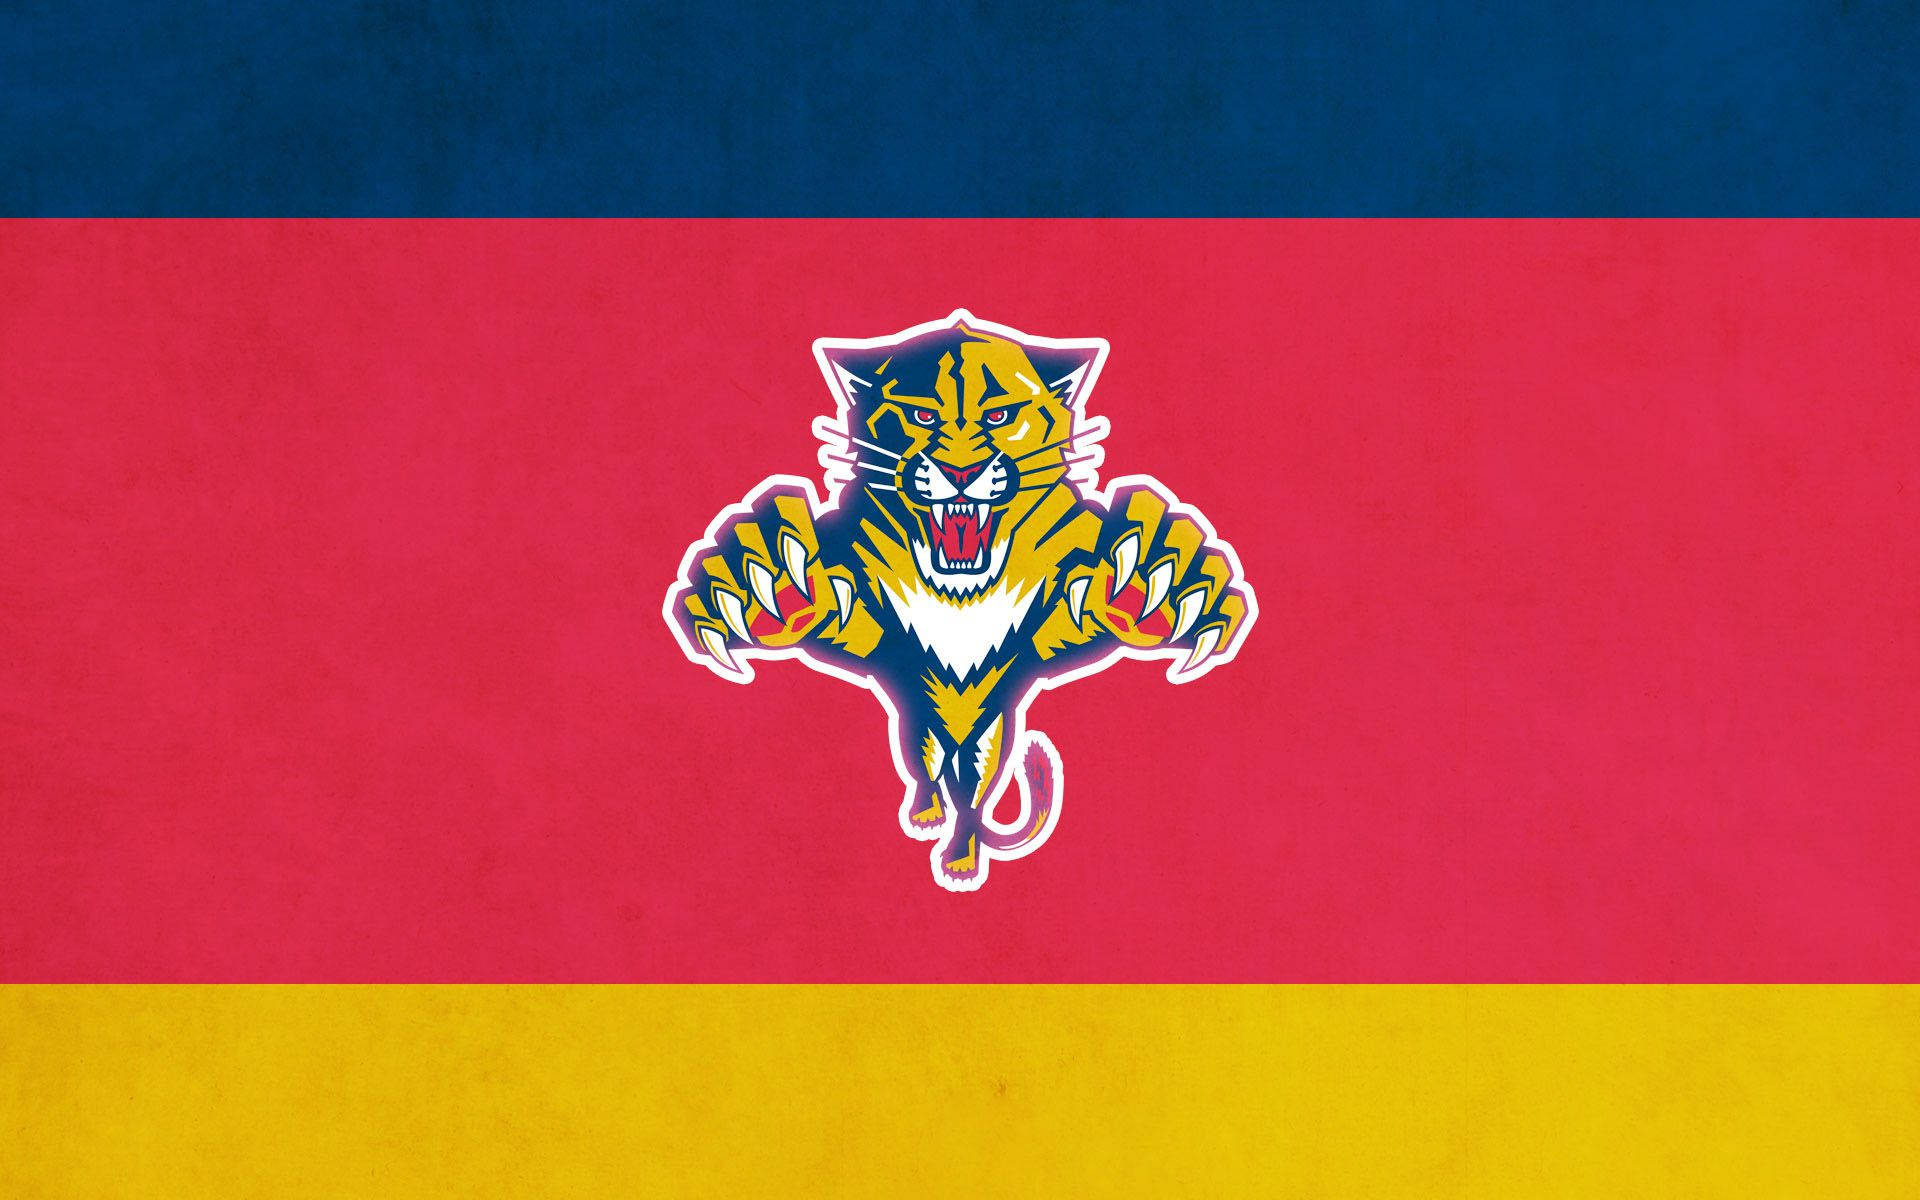 Florida Panthers Banner Background